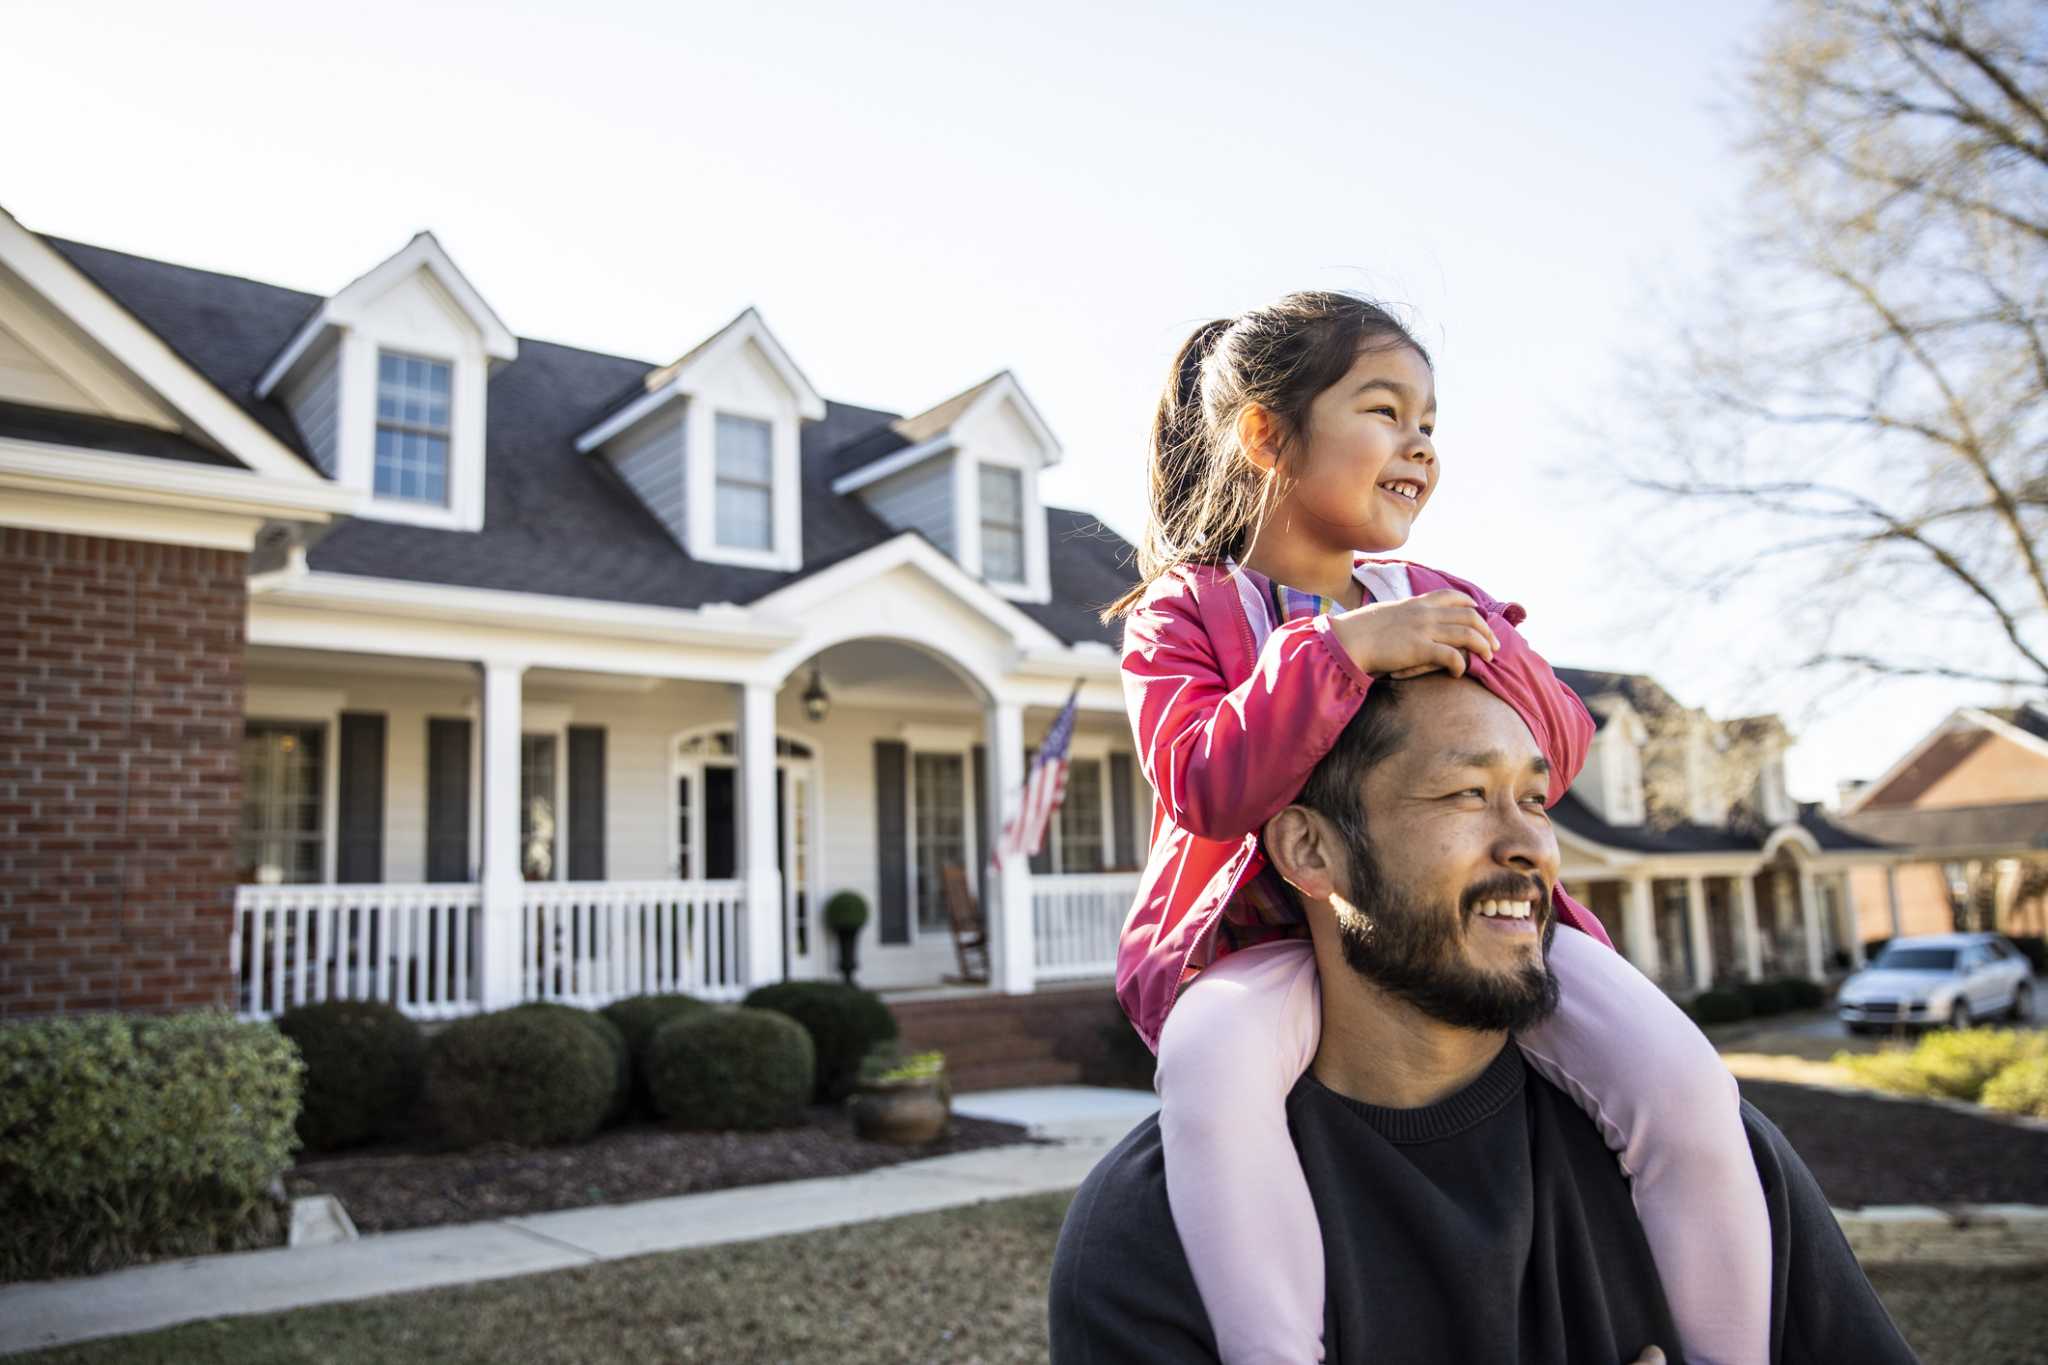 Save on Home Insurance With These Tips